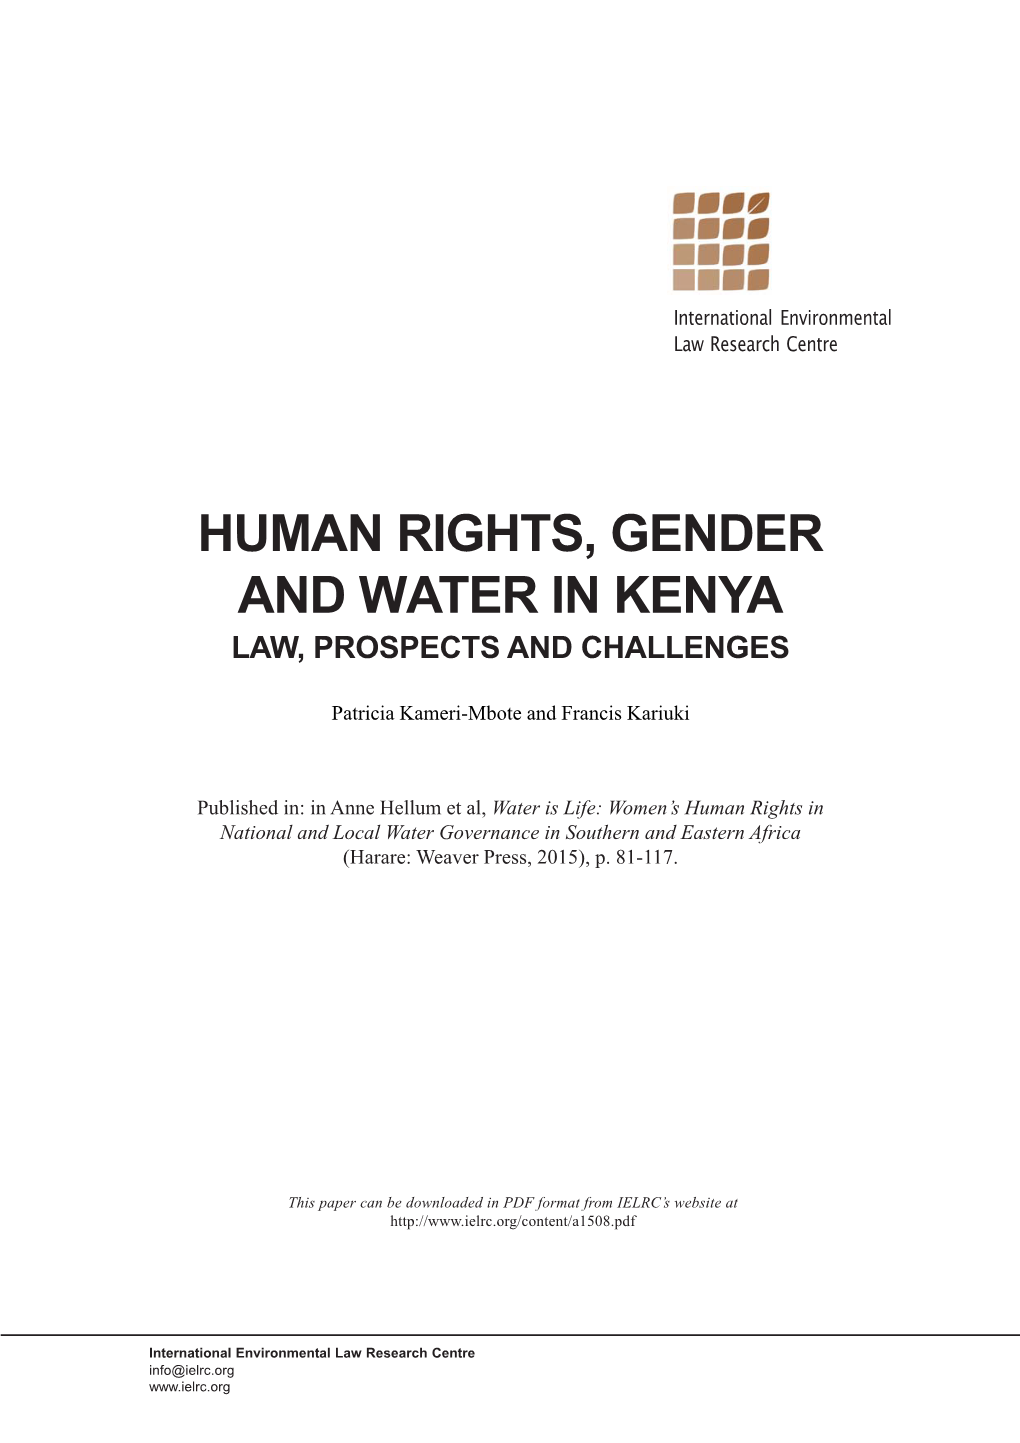 Human Rights, Gender and Water in Kenya: Law, Prospects and Challenges